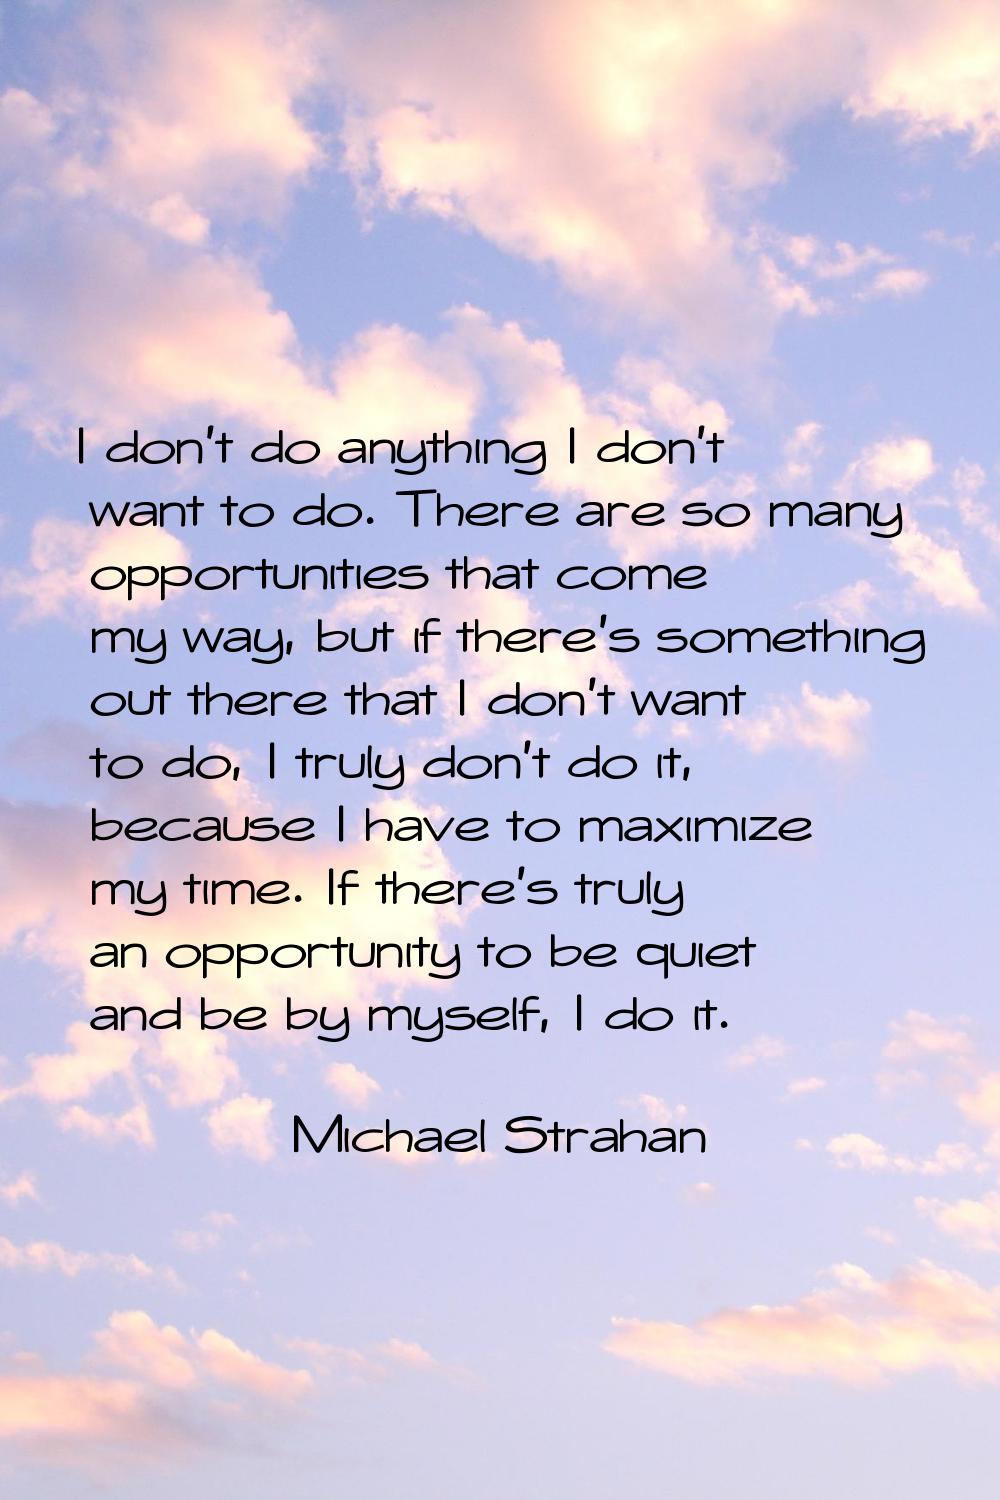 I don't do anything I don't want to do. There are so many opportunities that come my way, but if th